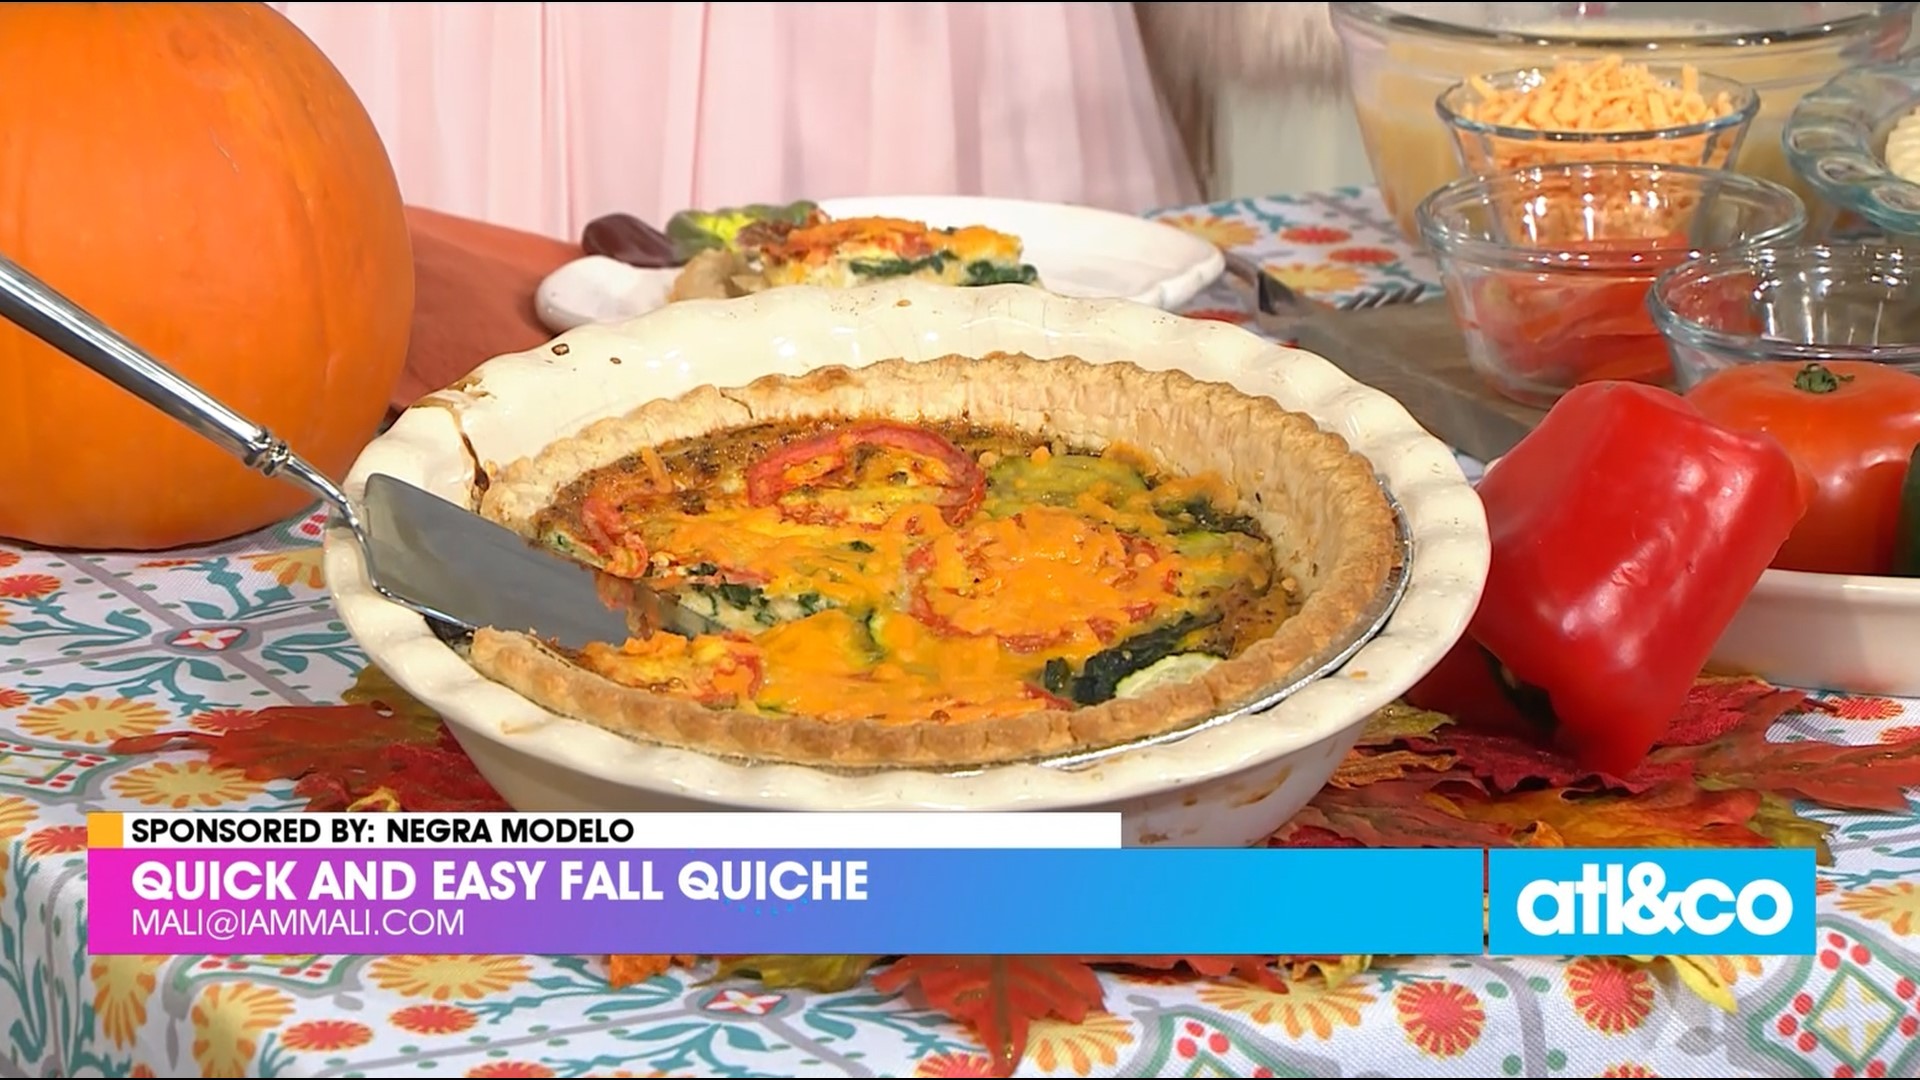 Chef Mali Wilson whipped up a simple and flavorful quiche and toasted with a Negra Modelo fall cocktail.